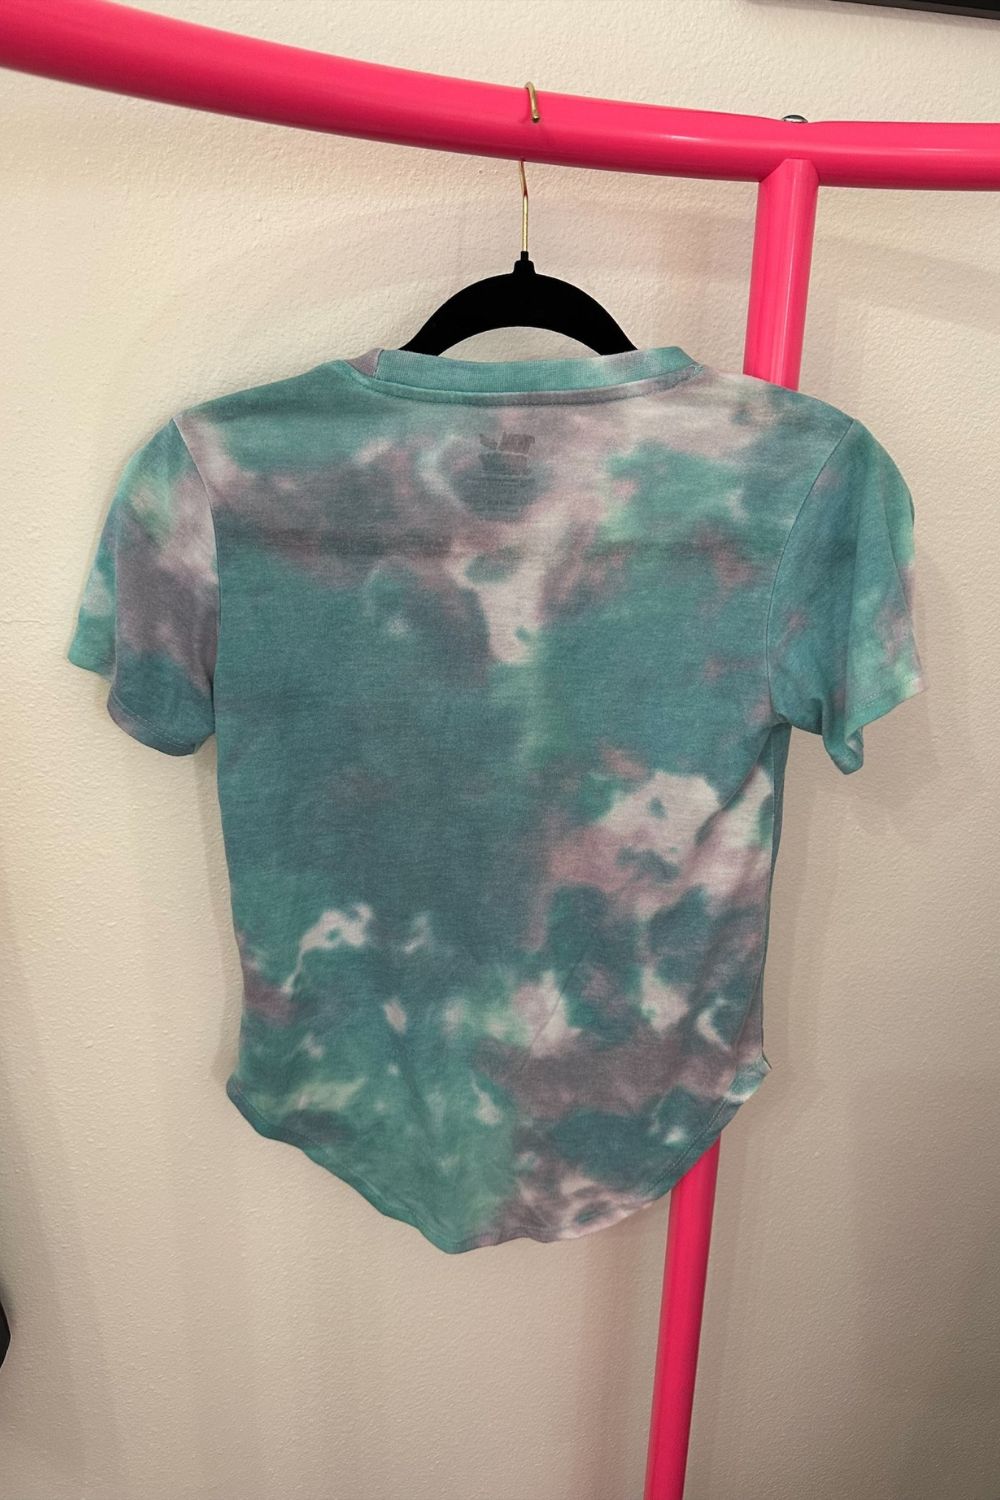 TOM AND JERRY TIE DYE CROP TOP- SIZE XS*